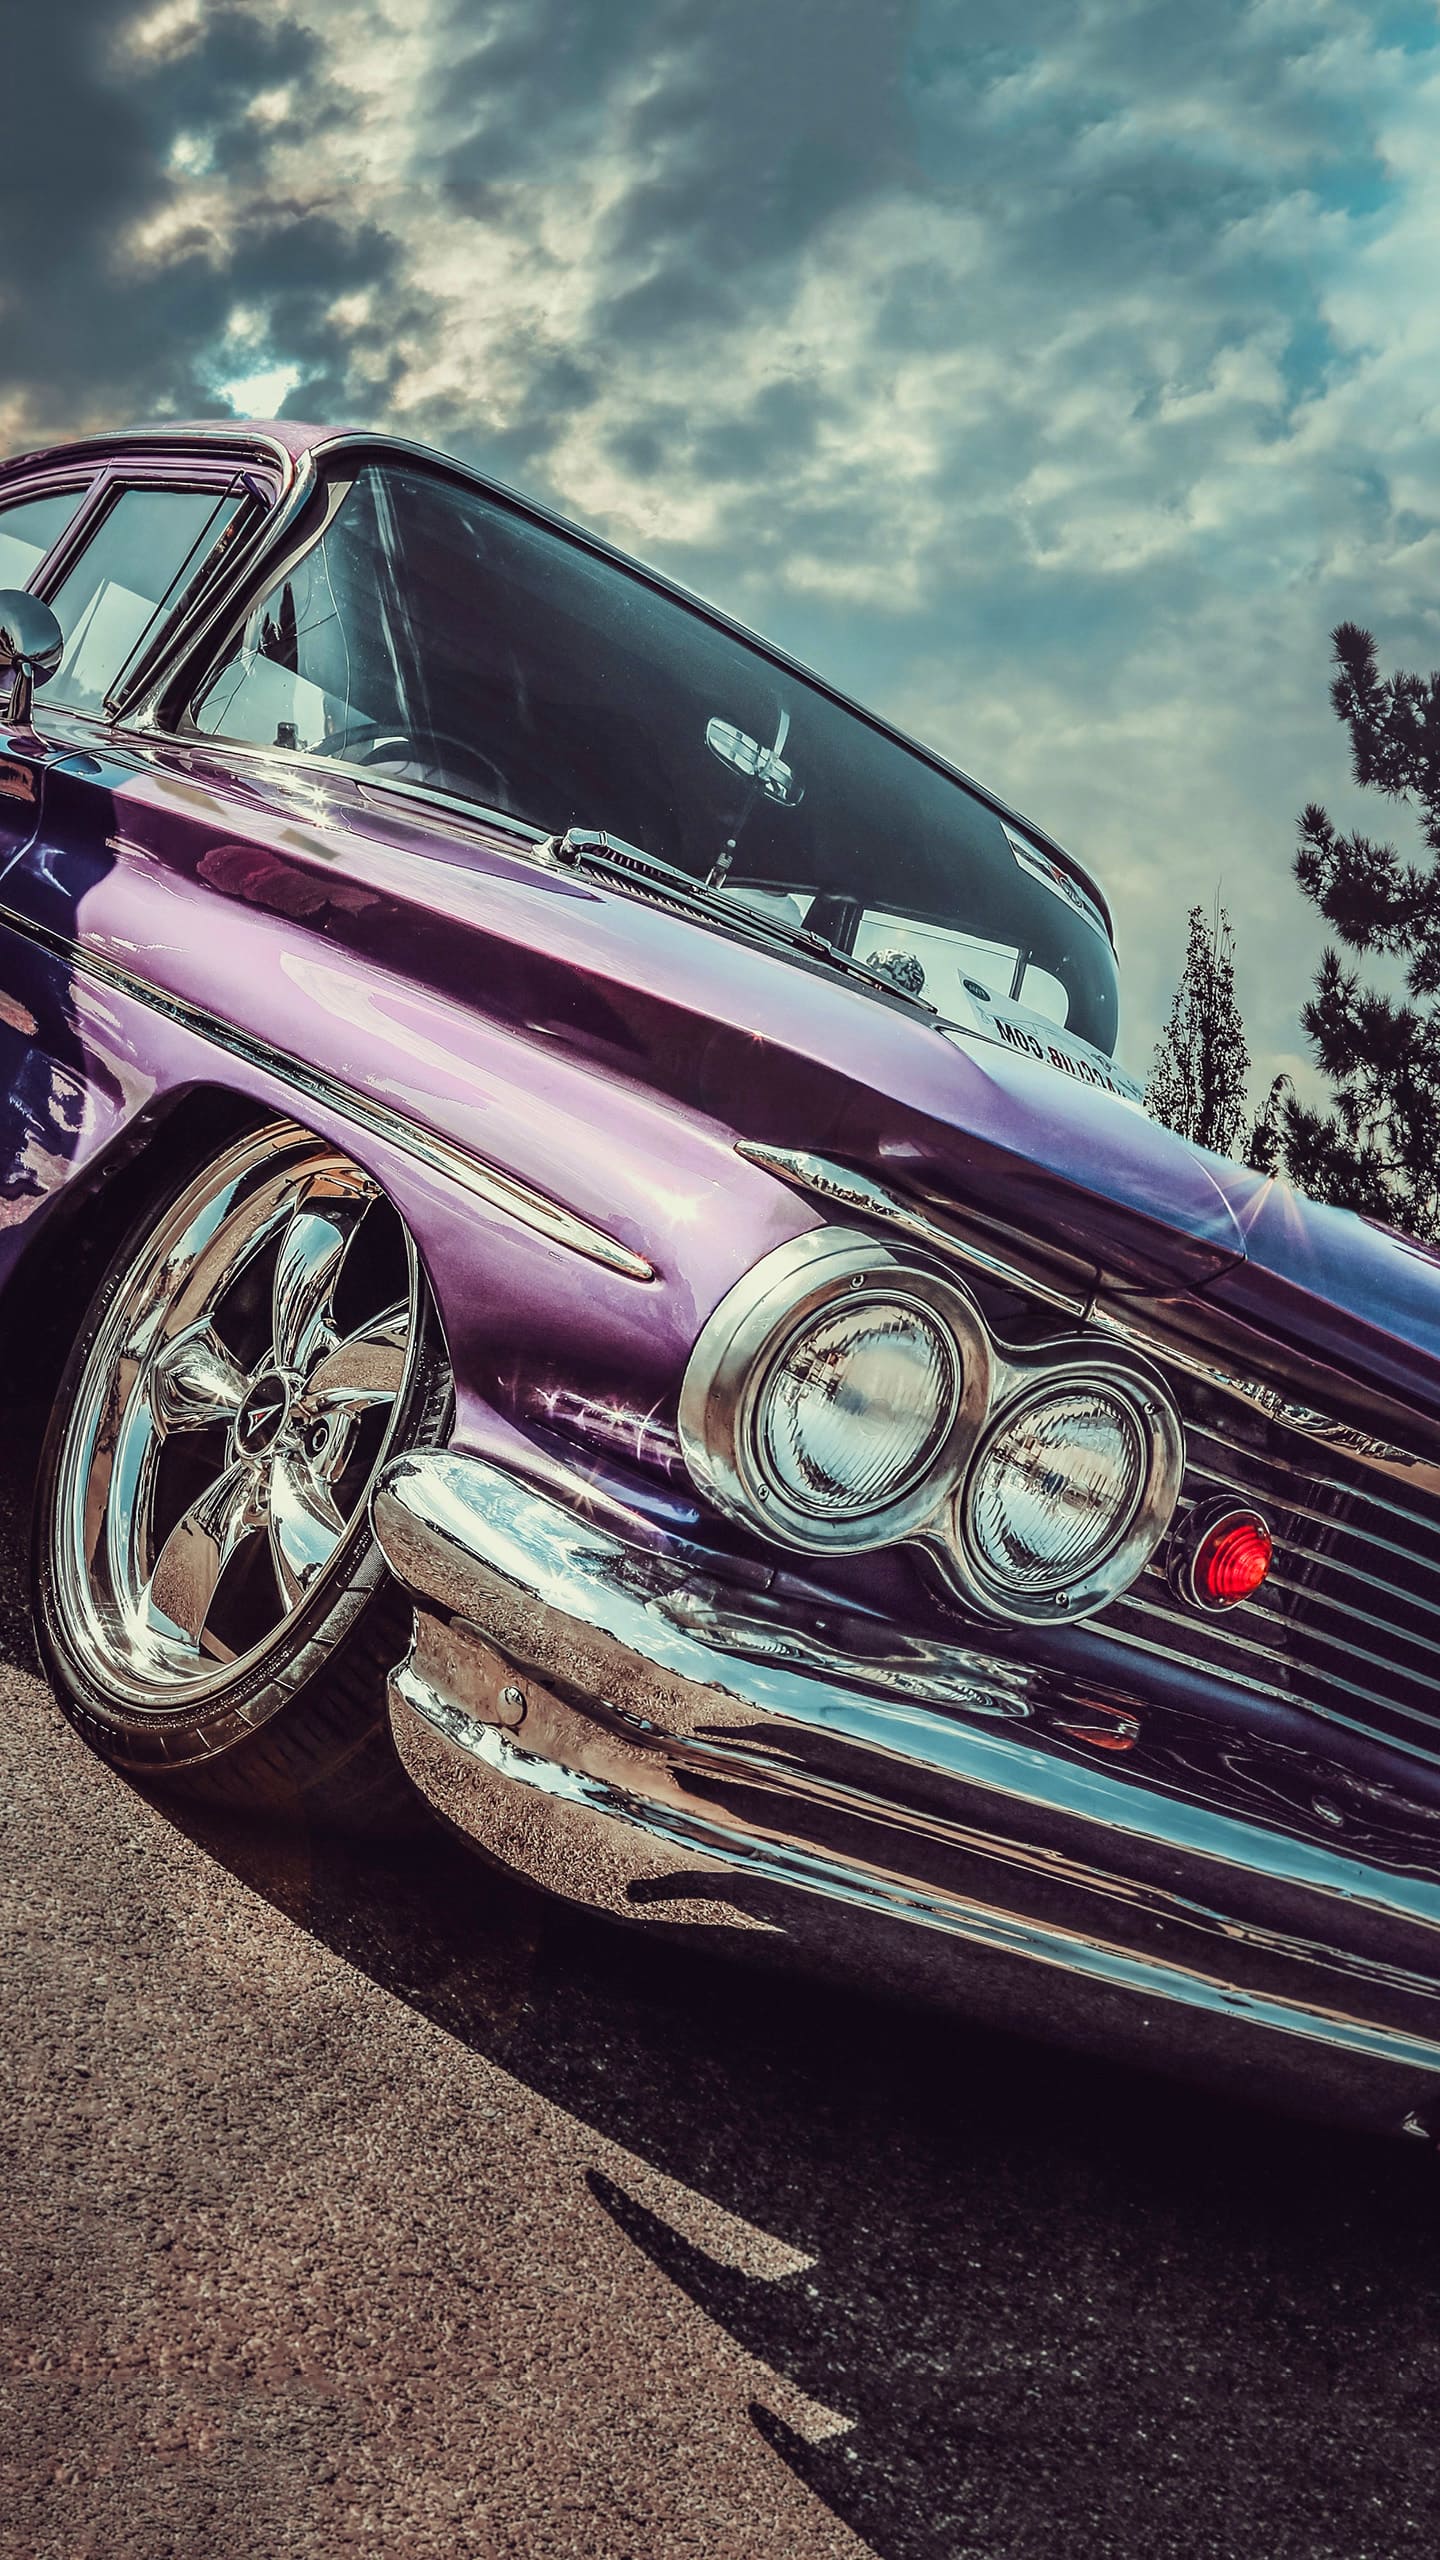 Low Rider wallpaper by Gorshiety  Download on ZEDGE  7e01